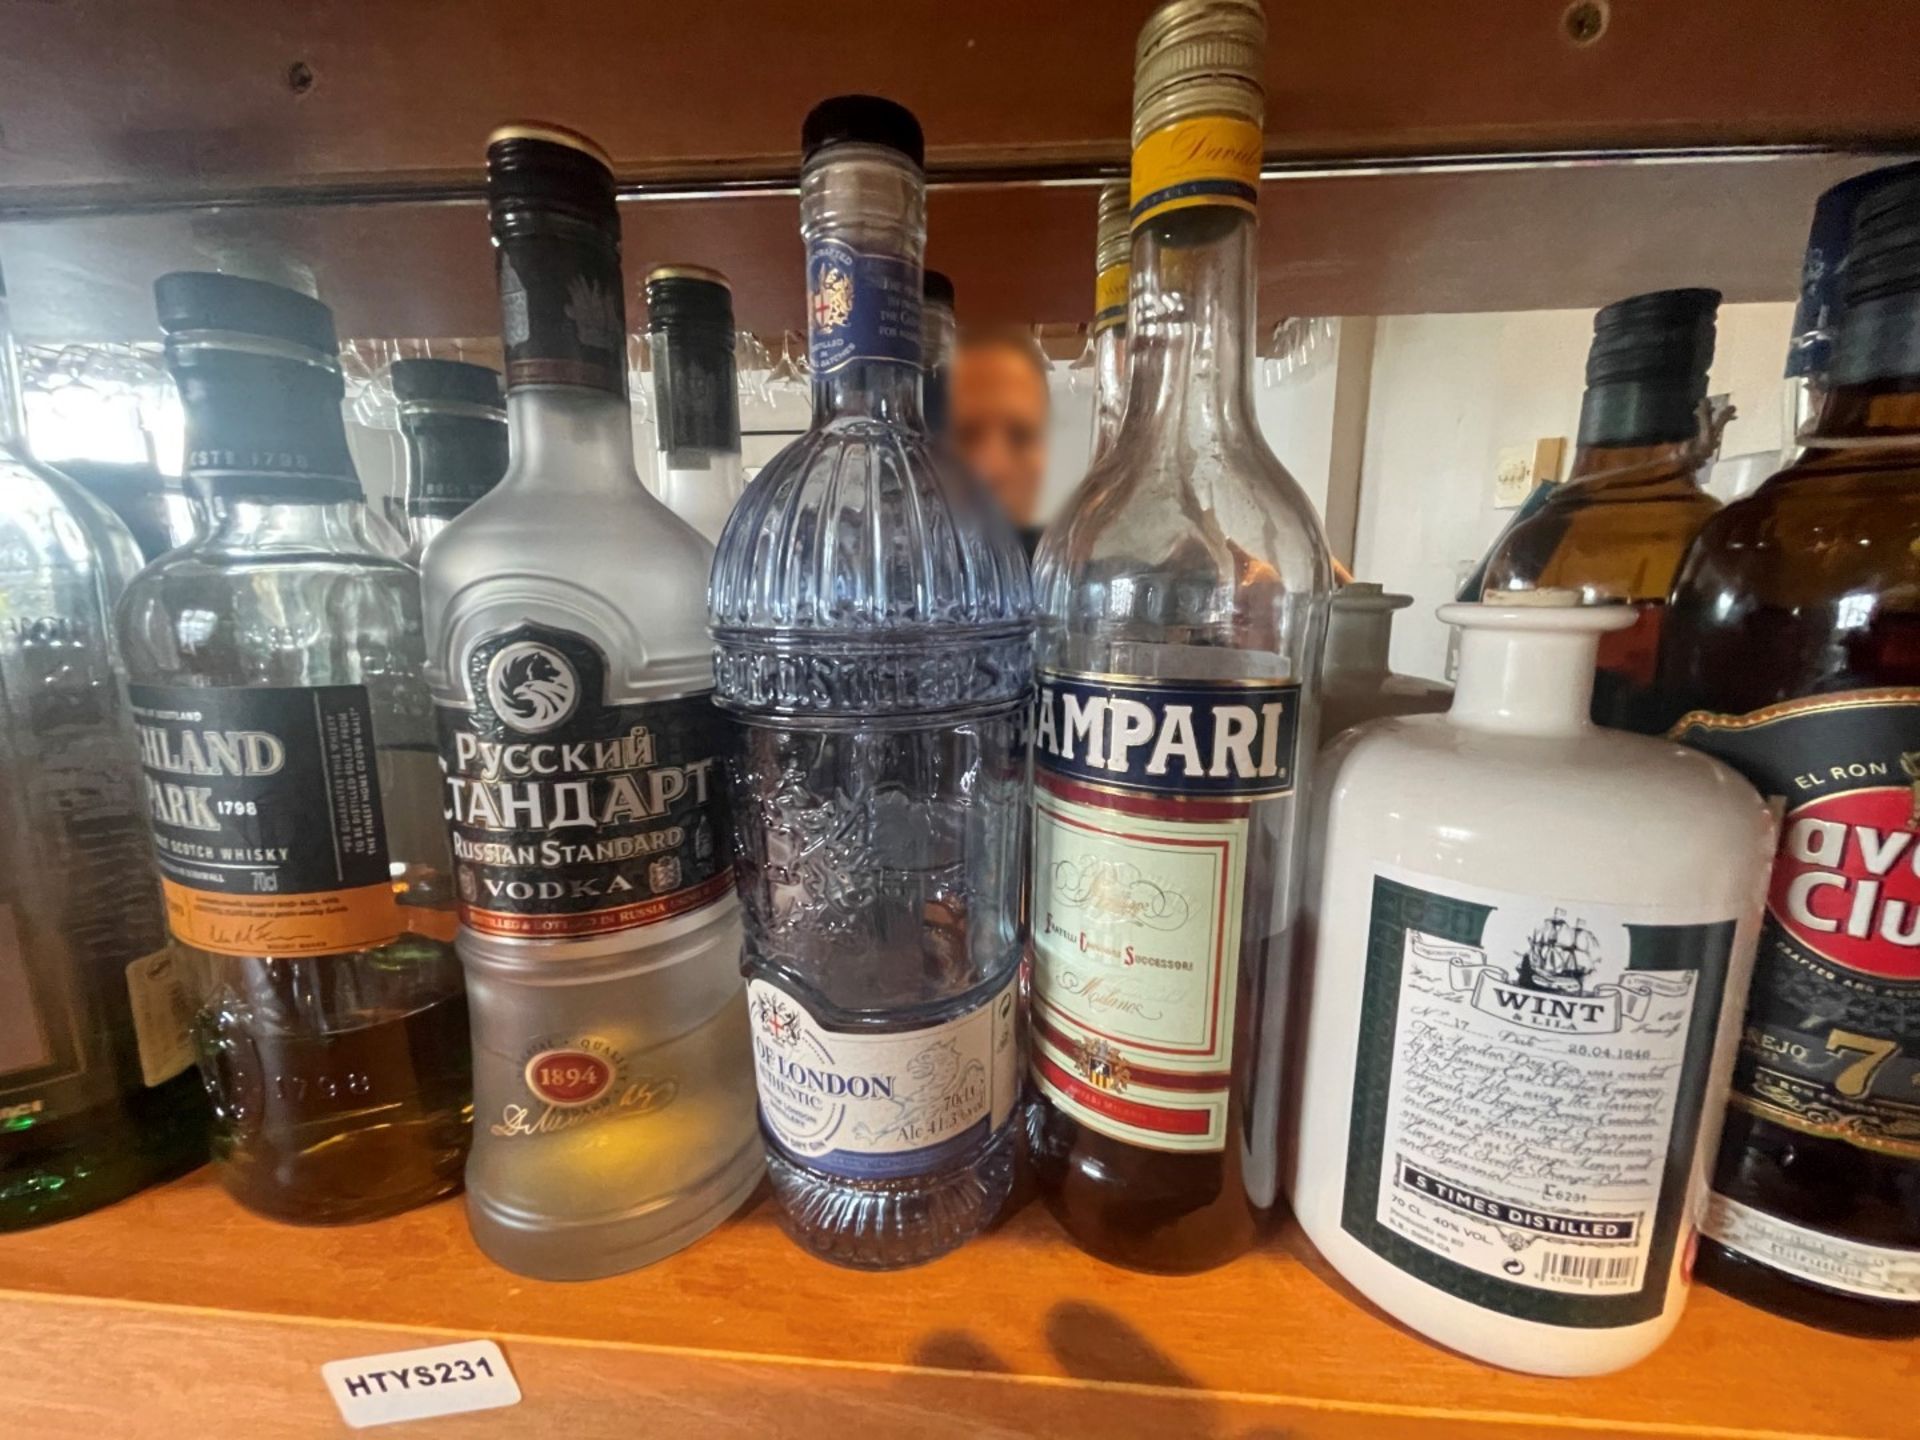 13 x Bottles of Various Spirits Including Sambuca, Vodka, Whisky, Gin, Rum and More - Part Used Open - Image 4 of 14